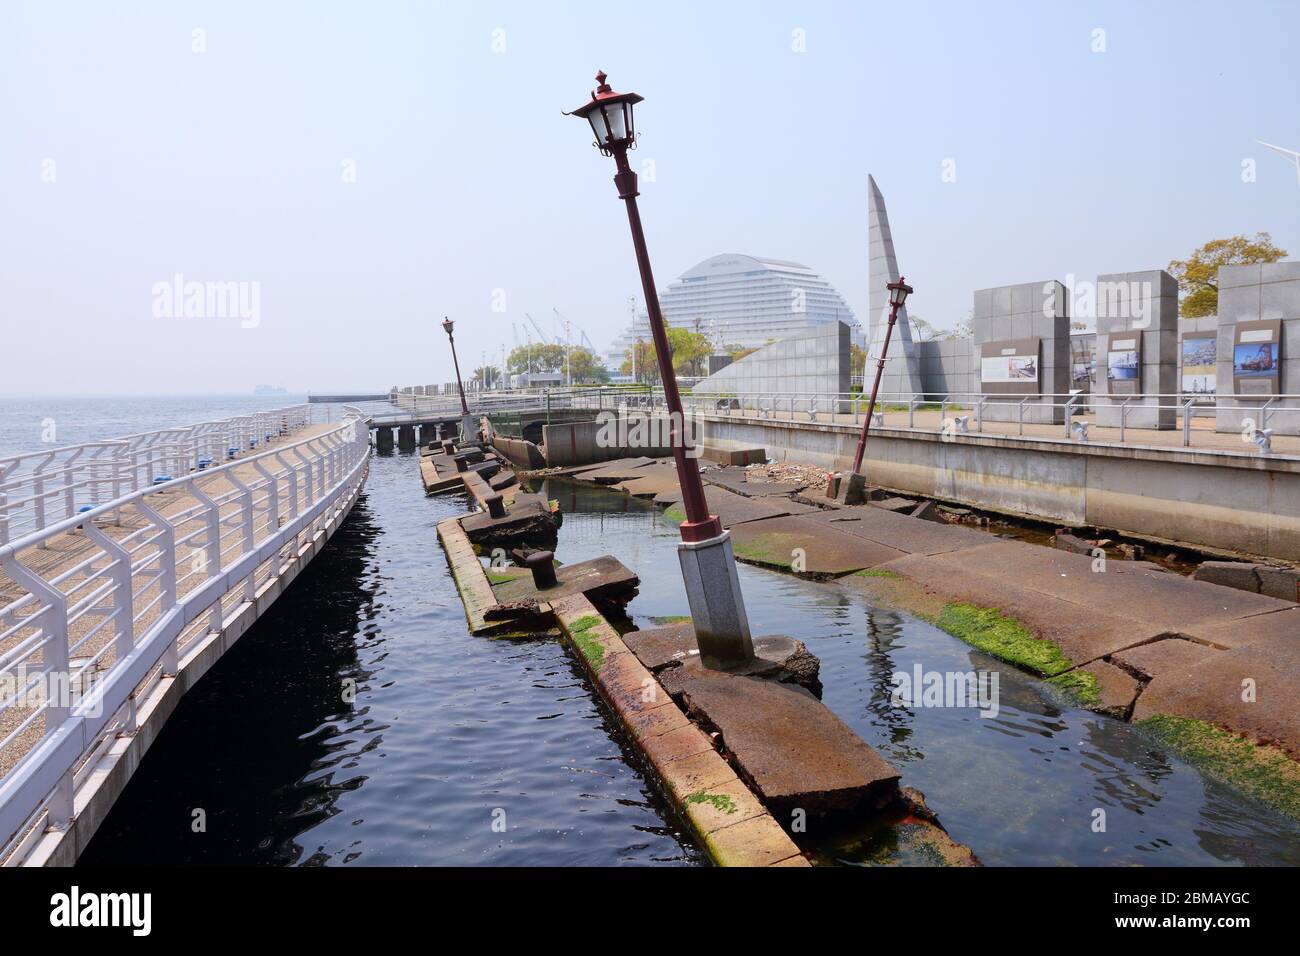 KOBE, JAPAN - APRIL 24, 2012: Ruined Meriken Wharf in Kobe. It was damaged by the Great Hanshin Earthquake in 1995 and is preserved as a memorial. Stock Photo